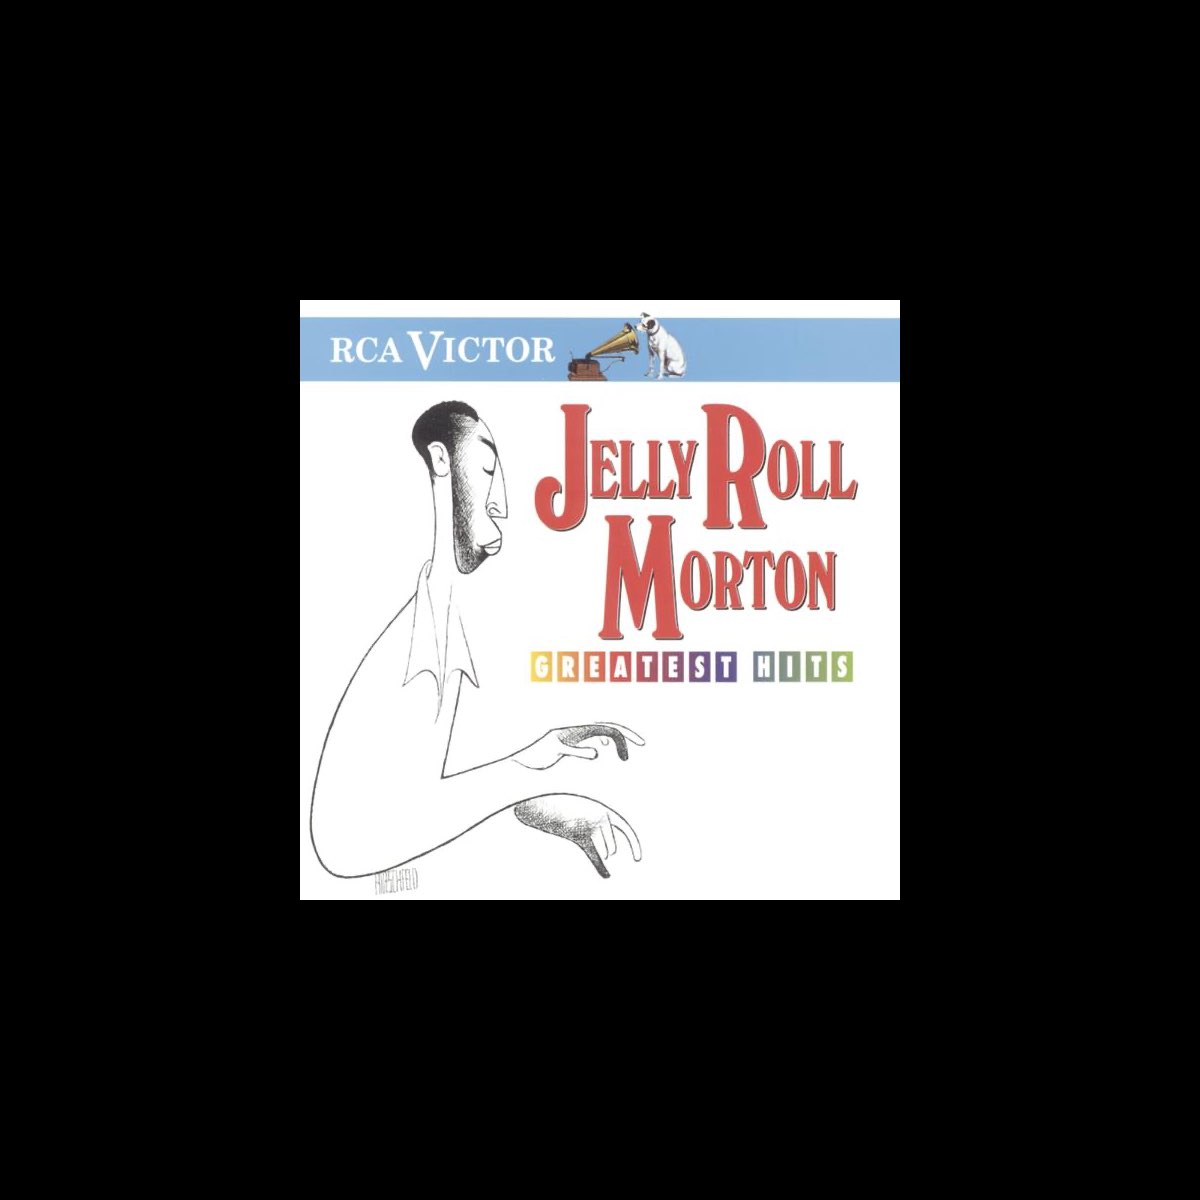 Jelly Roll Morton: Greatest Hits by Jelly Roll Morton on Apple Music